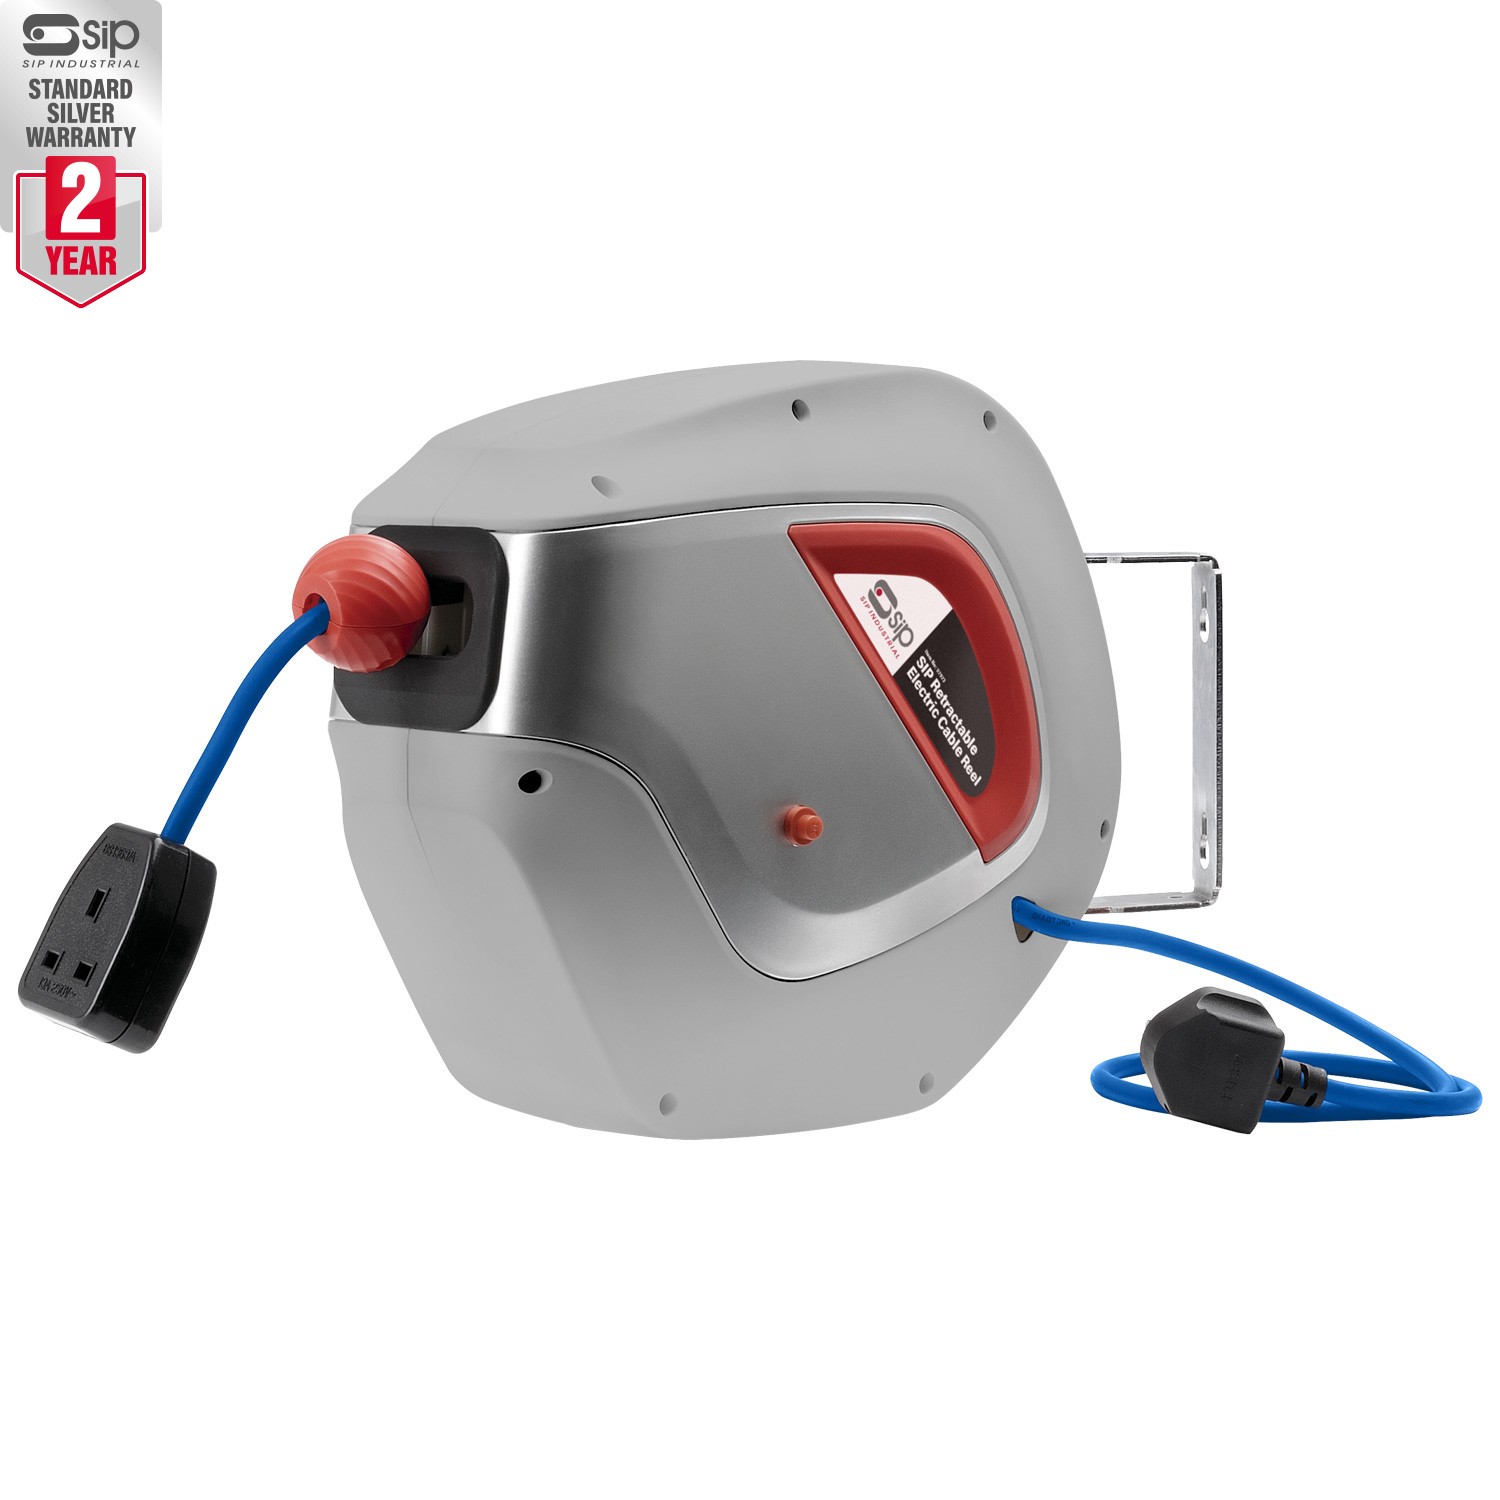 SIP Retractable Electric Cable Reel 15mtr - SIP Industrial Products  Official Website